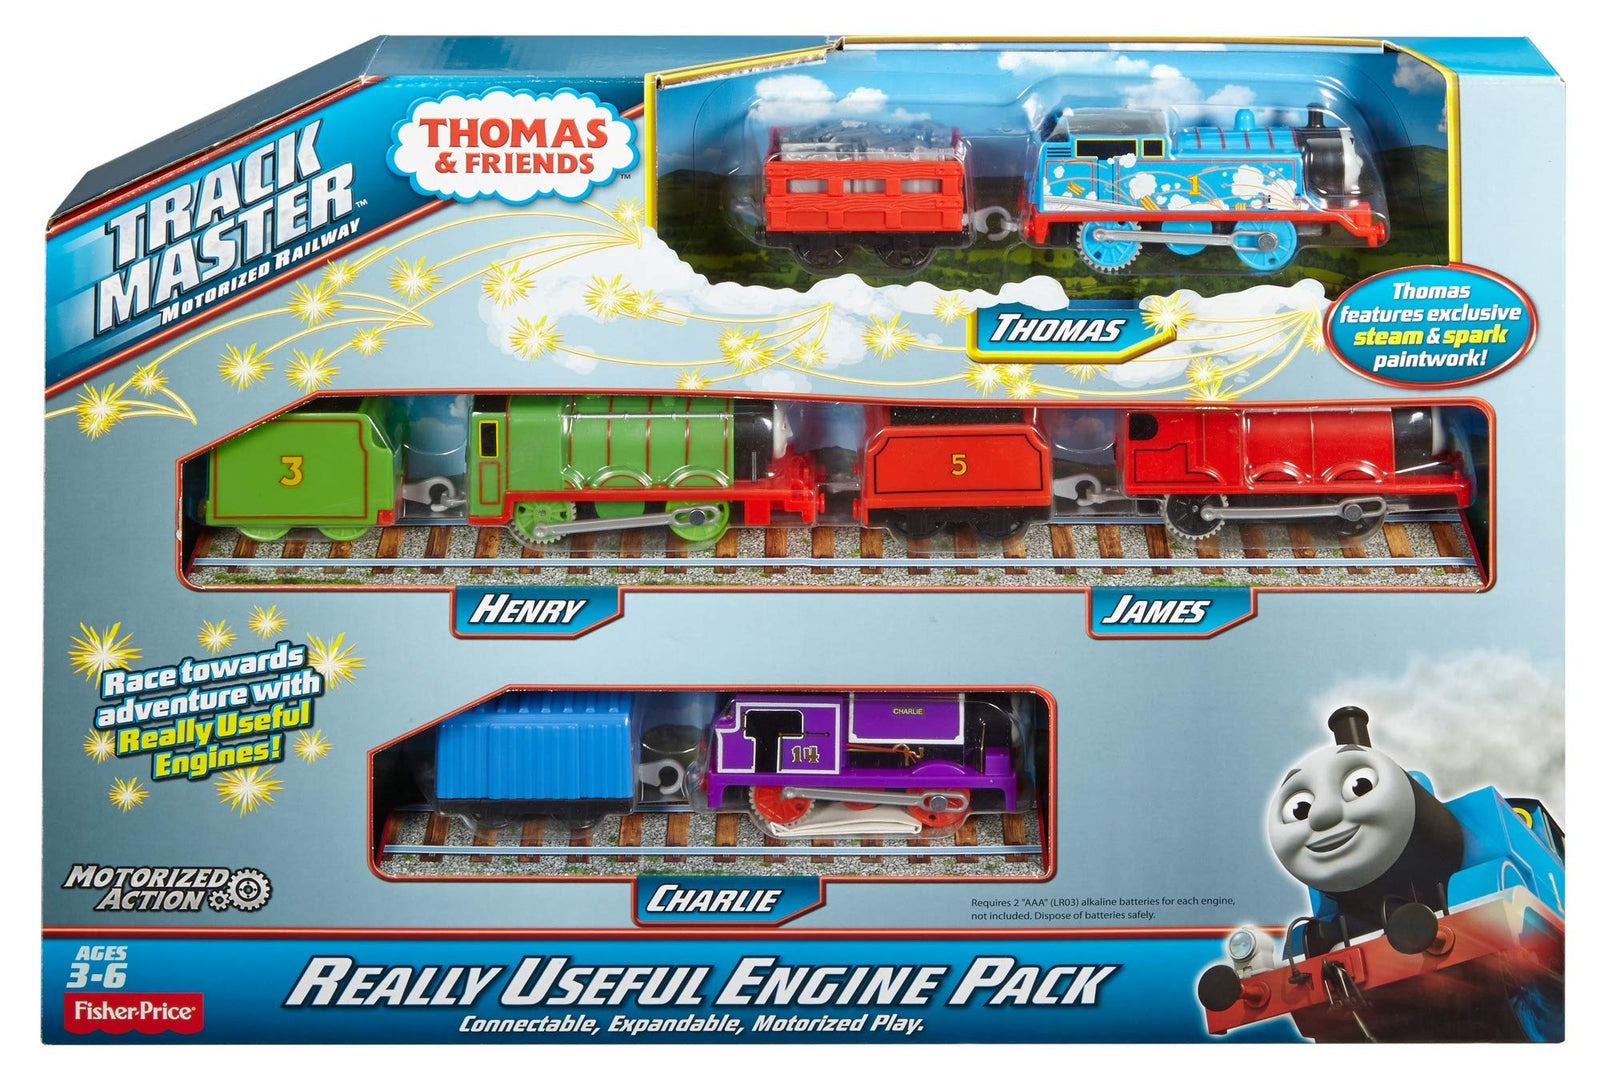 Thomas & Friends Multi-Pack of Motorized Toy Trains